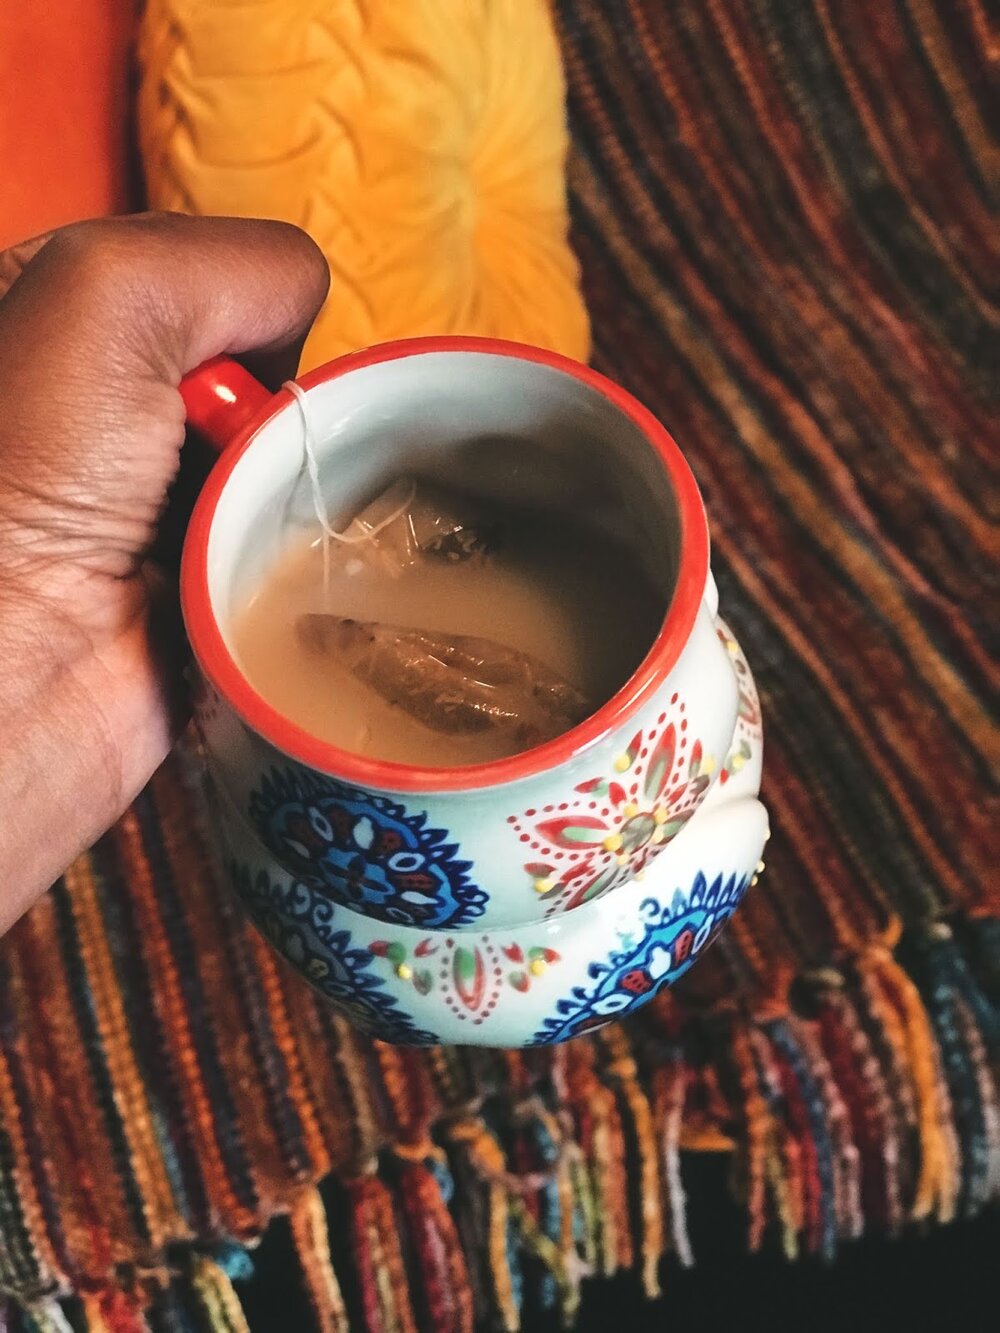 Tea Diaries: Little Chit Chats, Looking For A Change Of Pace And Trying NEW Things!